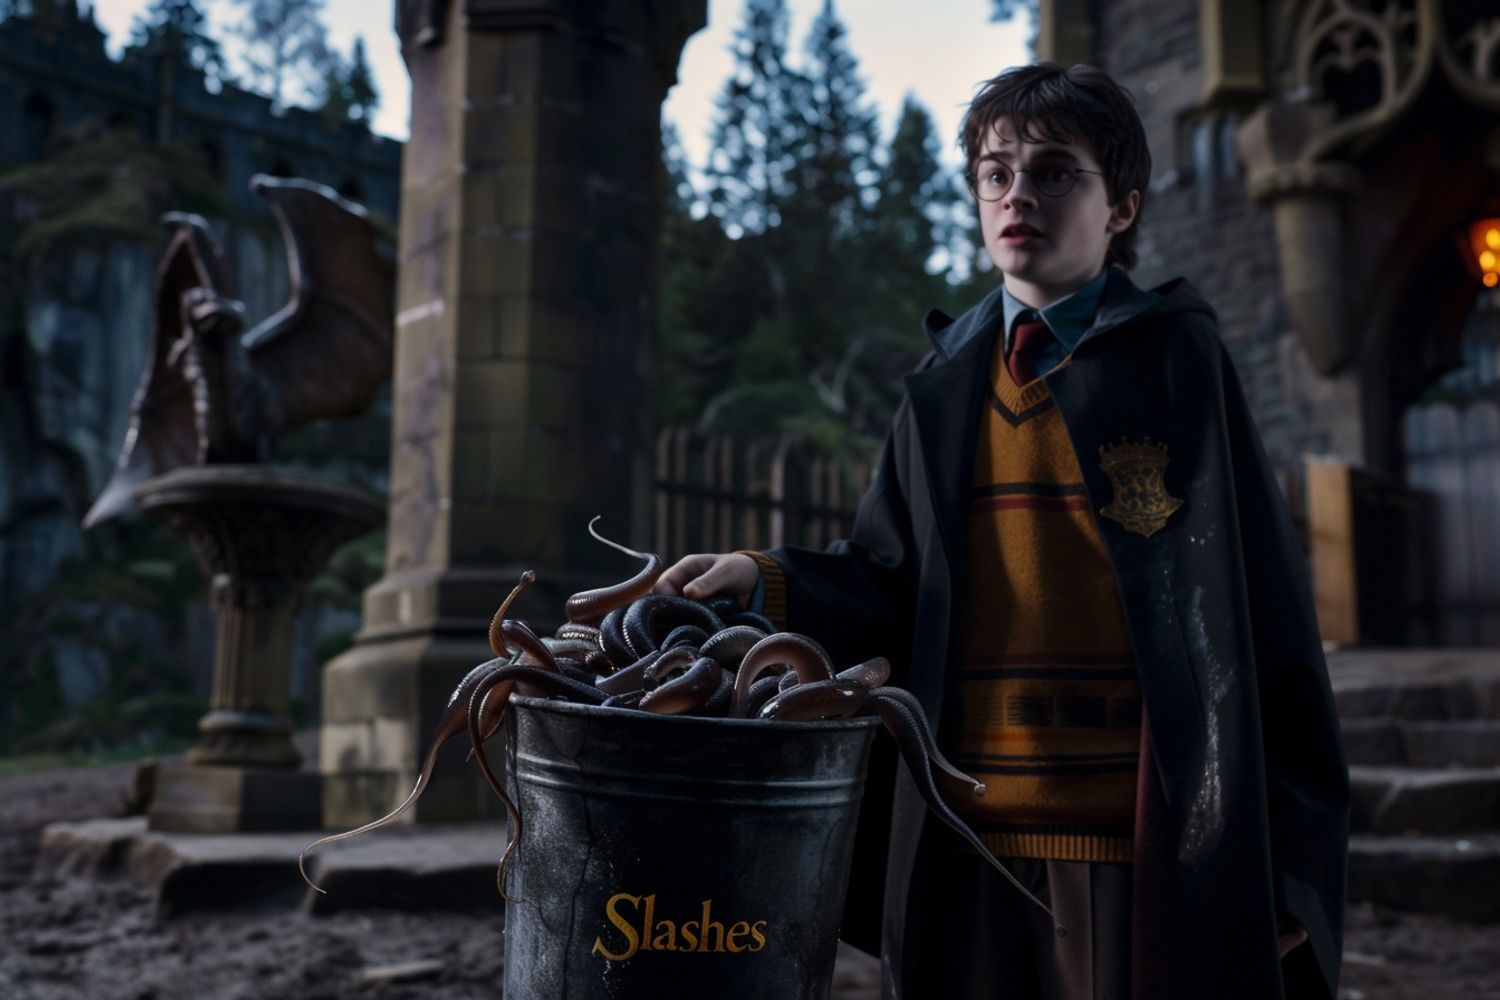 Harry Potter holding a bucket of overflowing slimy slugs at Hogwarts, with the text "Slashes" on bucket